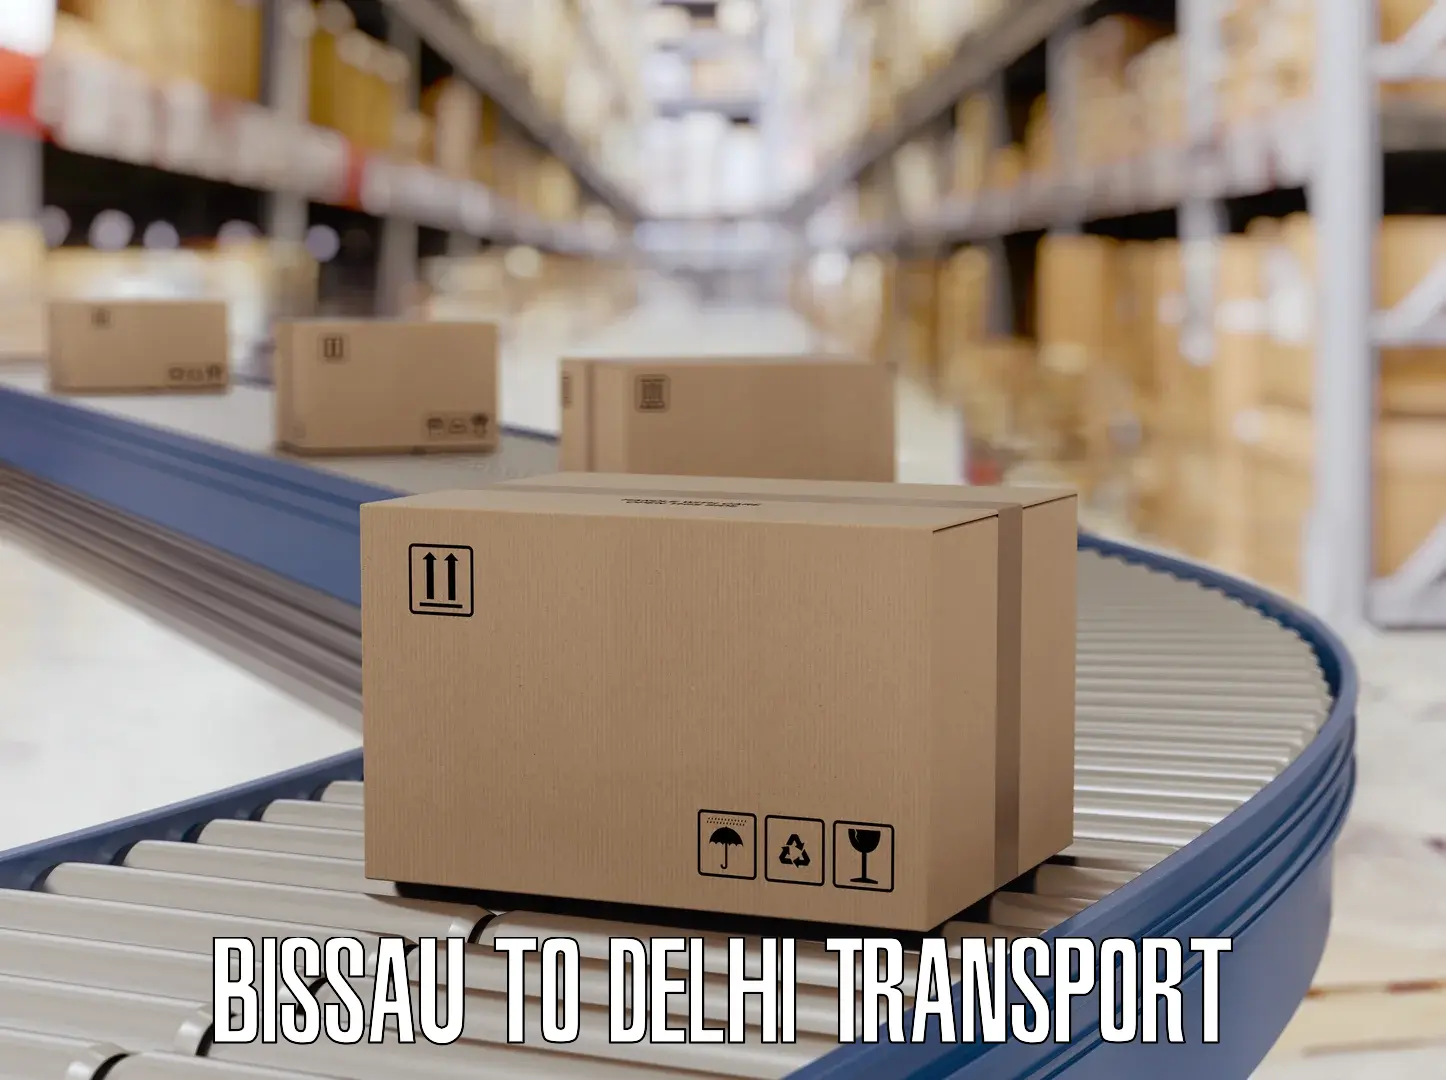 Two wheeler parcel service Bissau to NCR